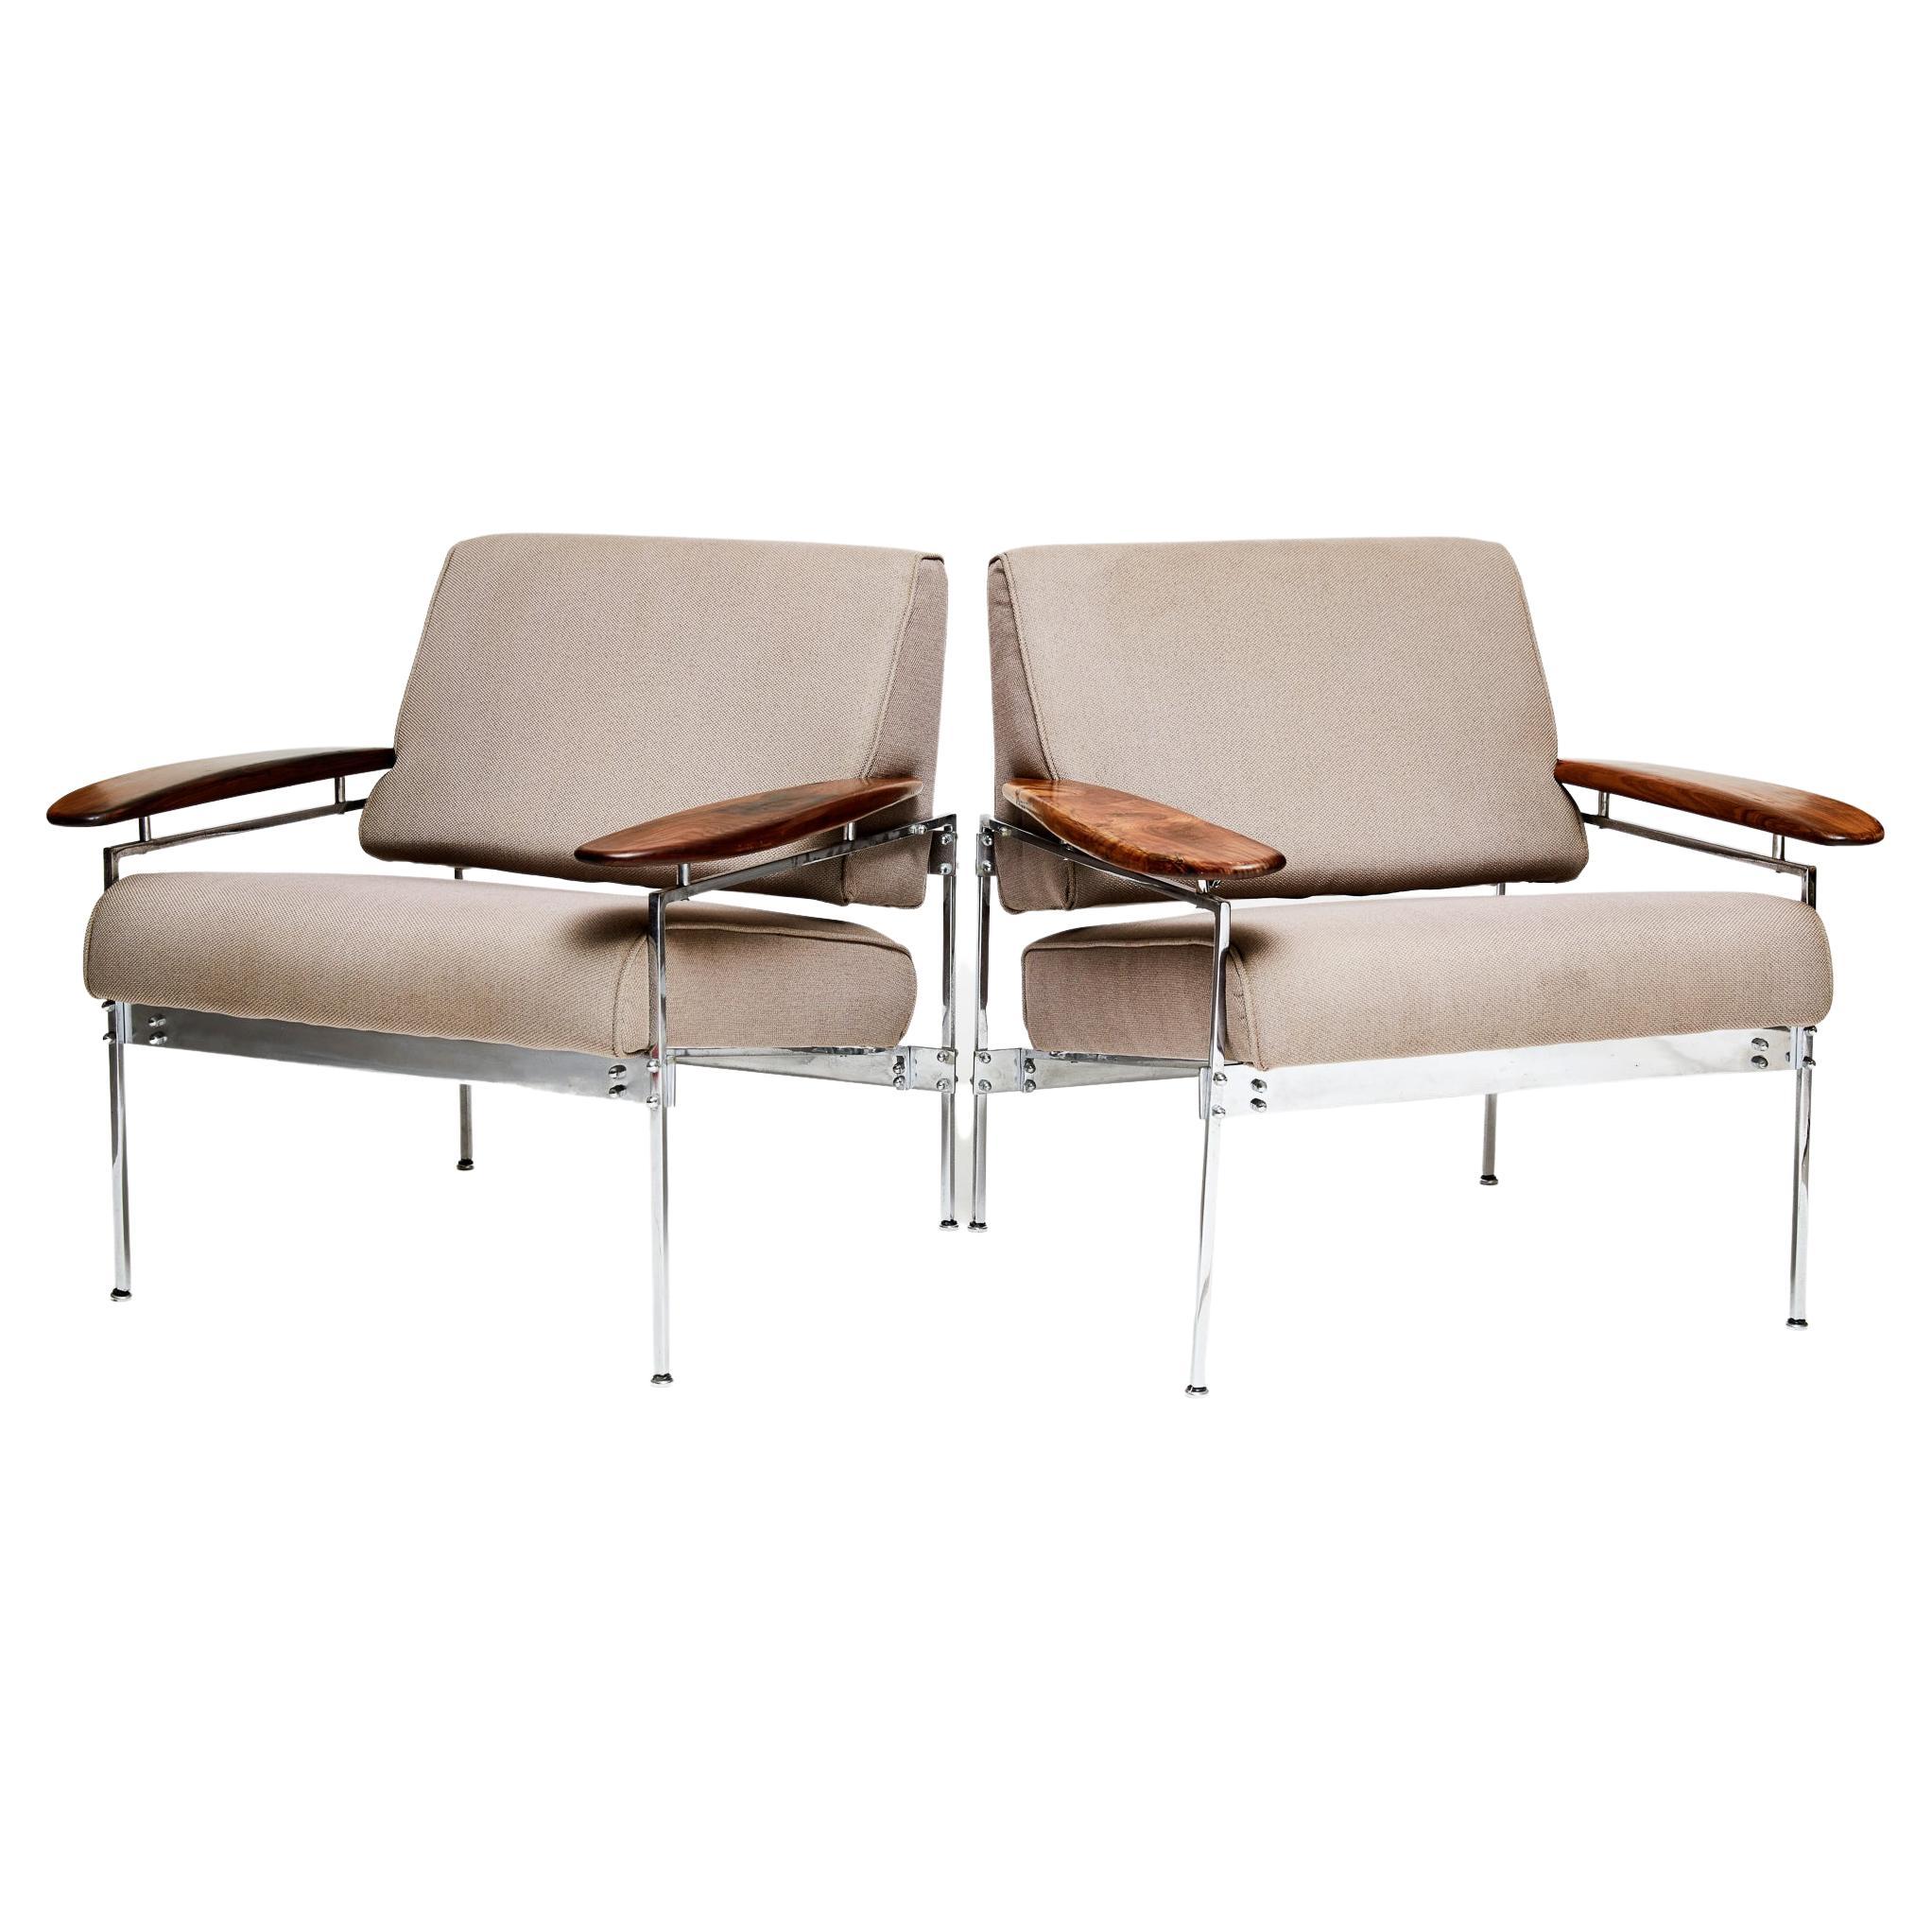 Available today, the Brazilian Modern armchairs feature a chrome steel frame, beige fabric, and jacaranda hardwood (Brazilian rosewood) armrests. The armchair is a merge of sleek modernist elements and warm robust qualities. The armrests in